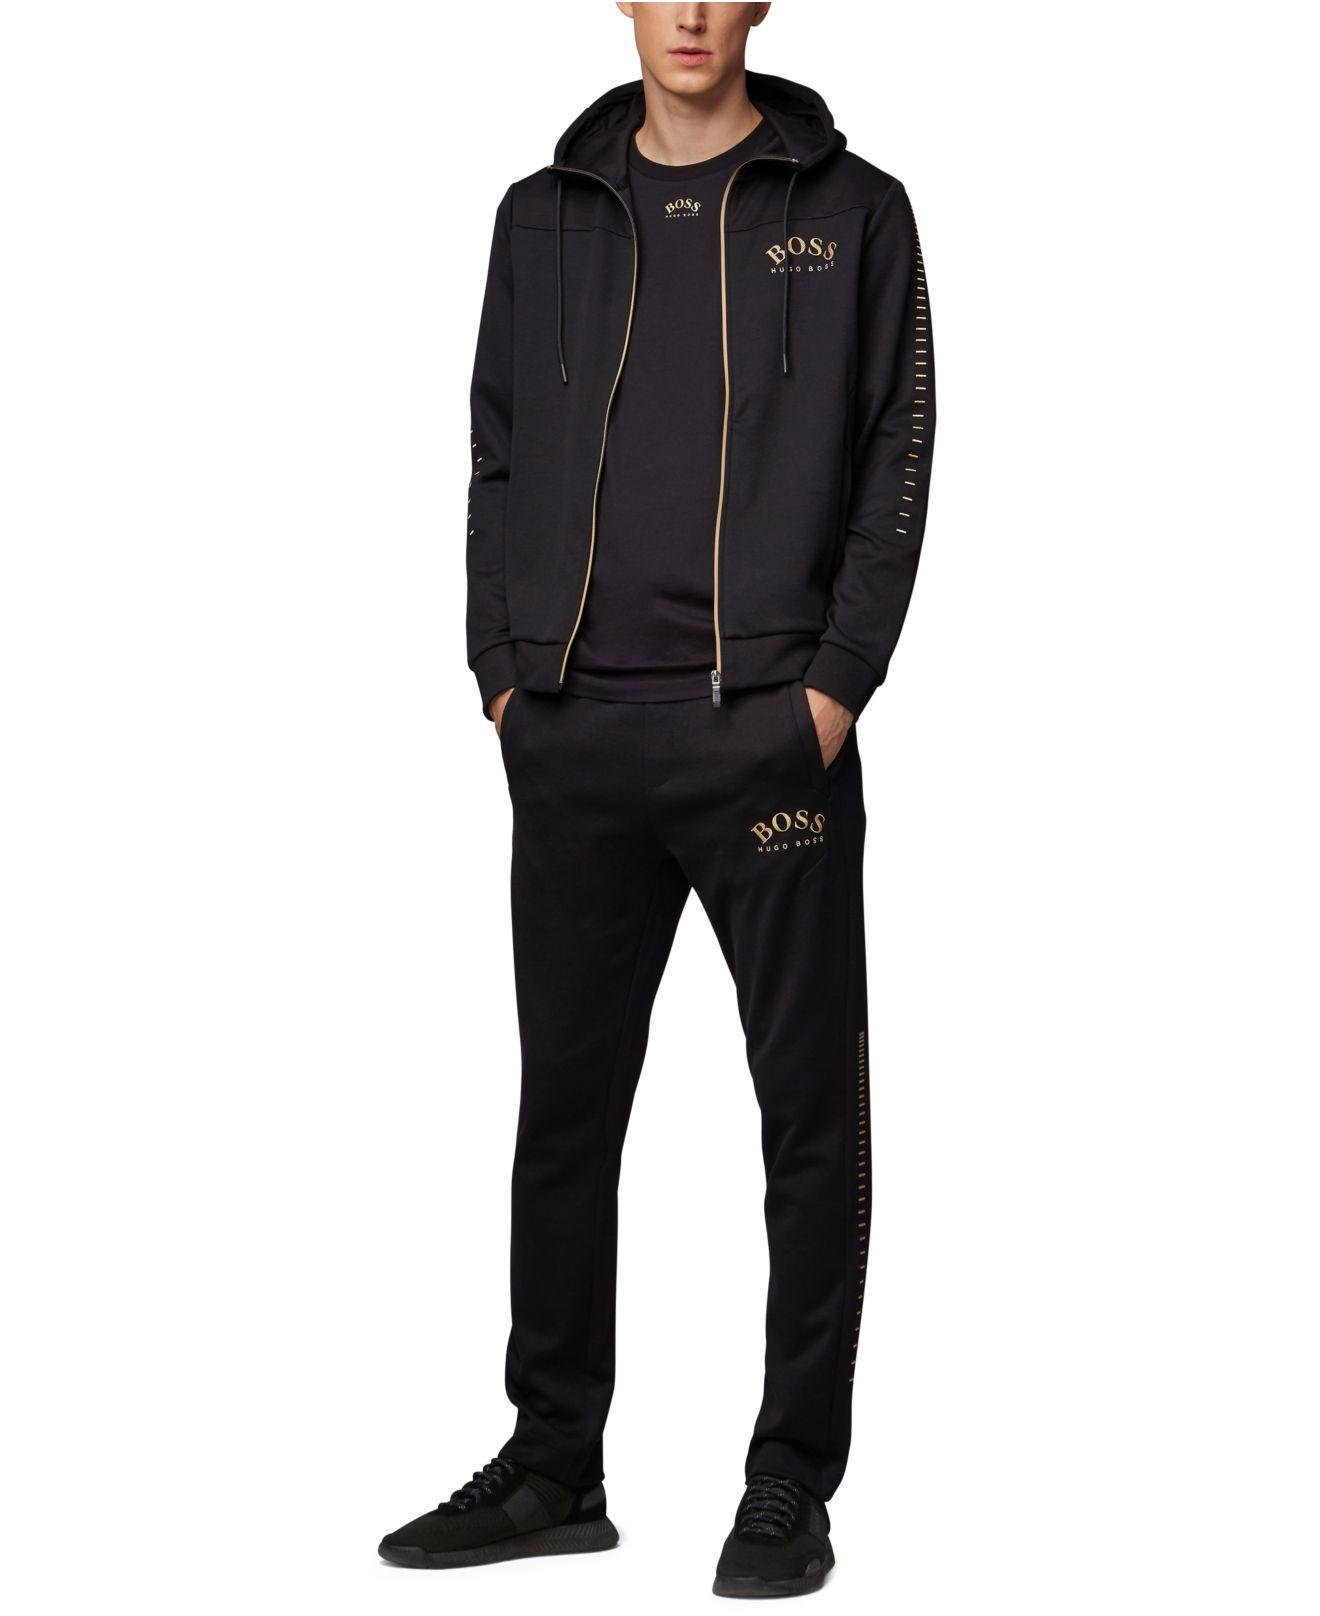 BOSS by HUGO BOSS Cotton Curved Logo Zip-up Hoodie in Black for Men - Lyst